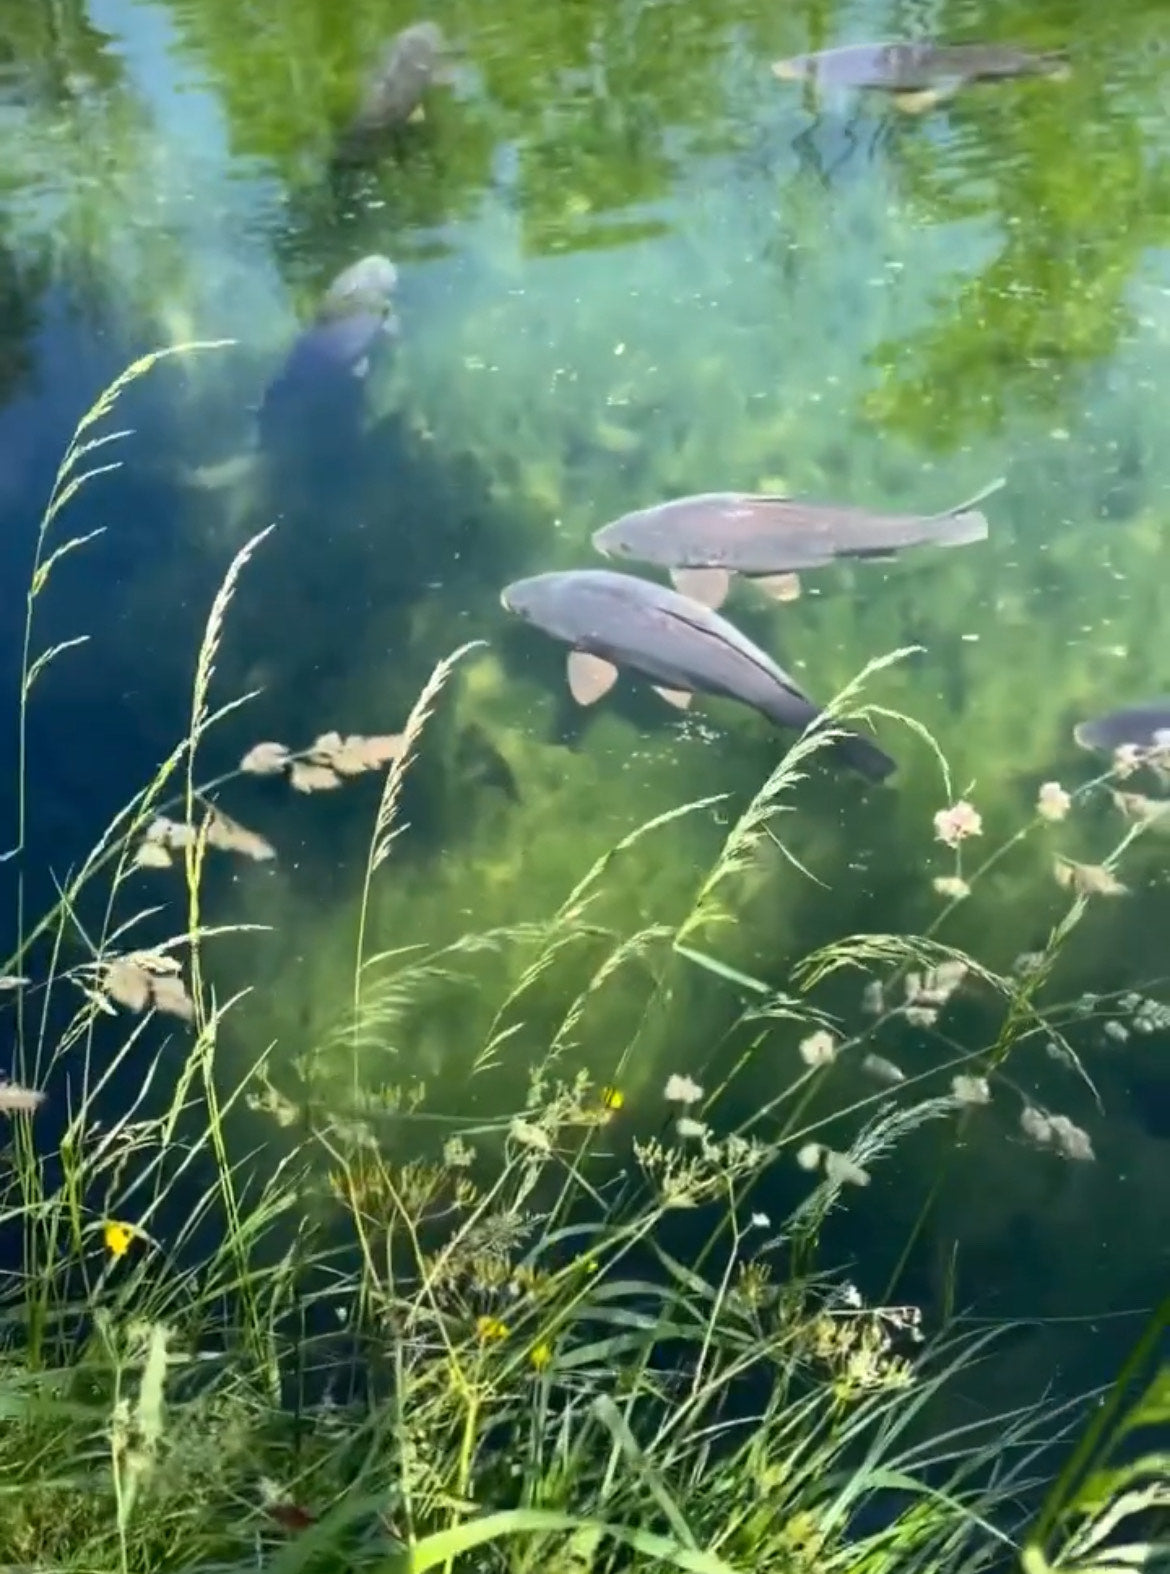 Stalking Carp From the surface